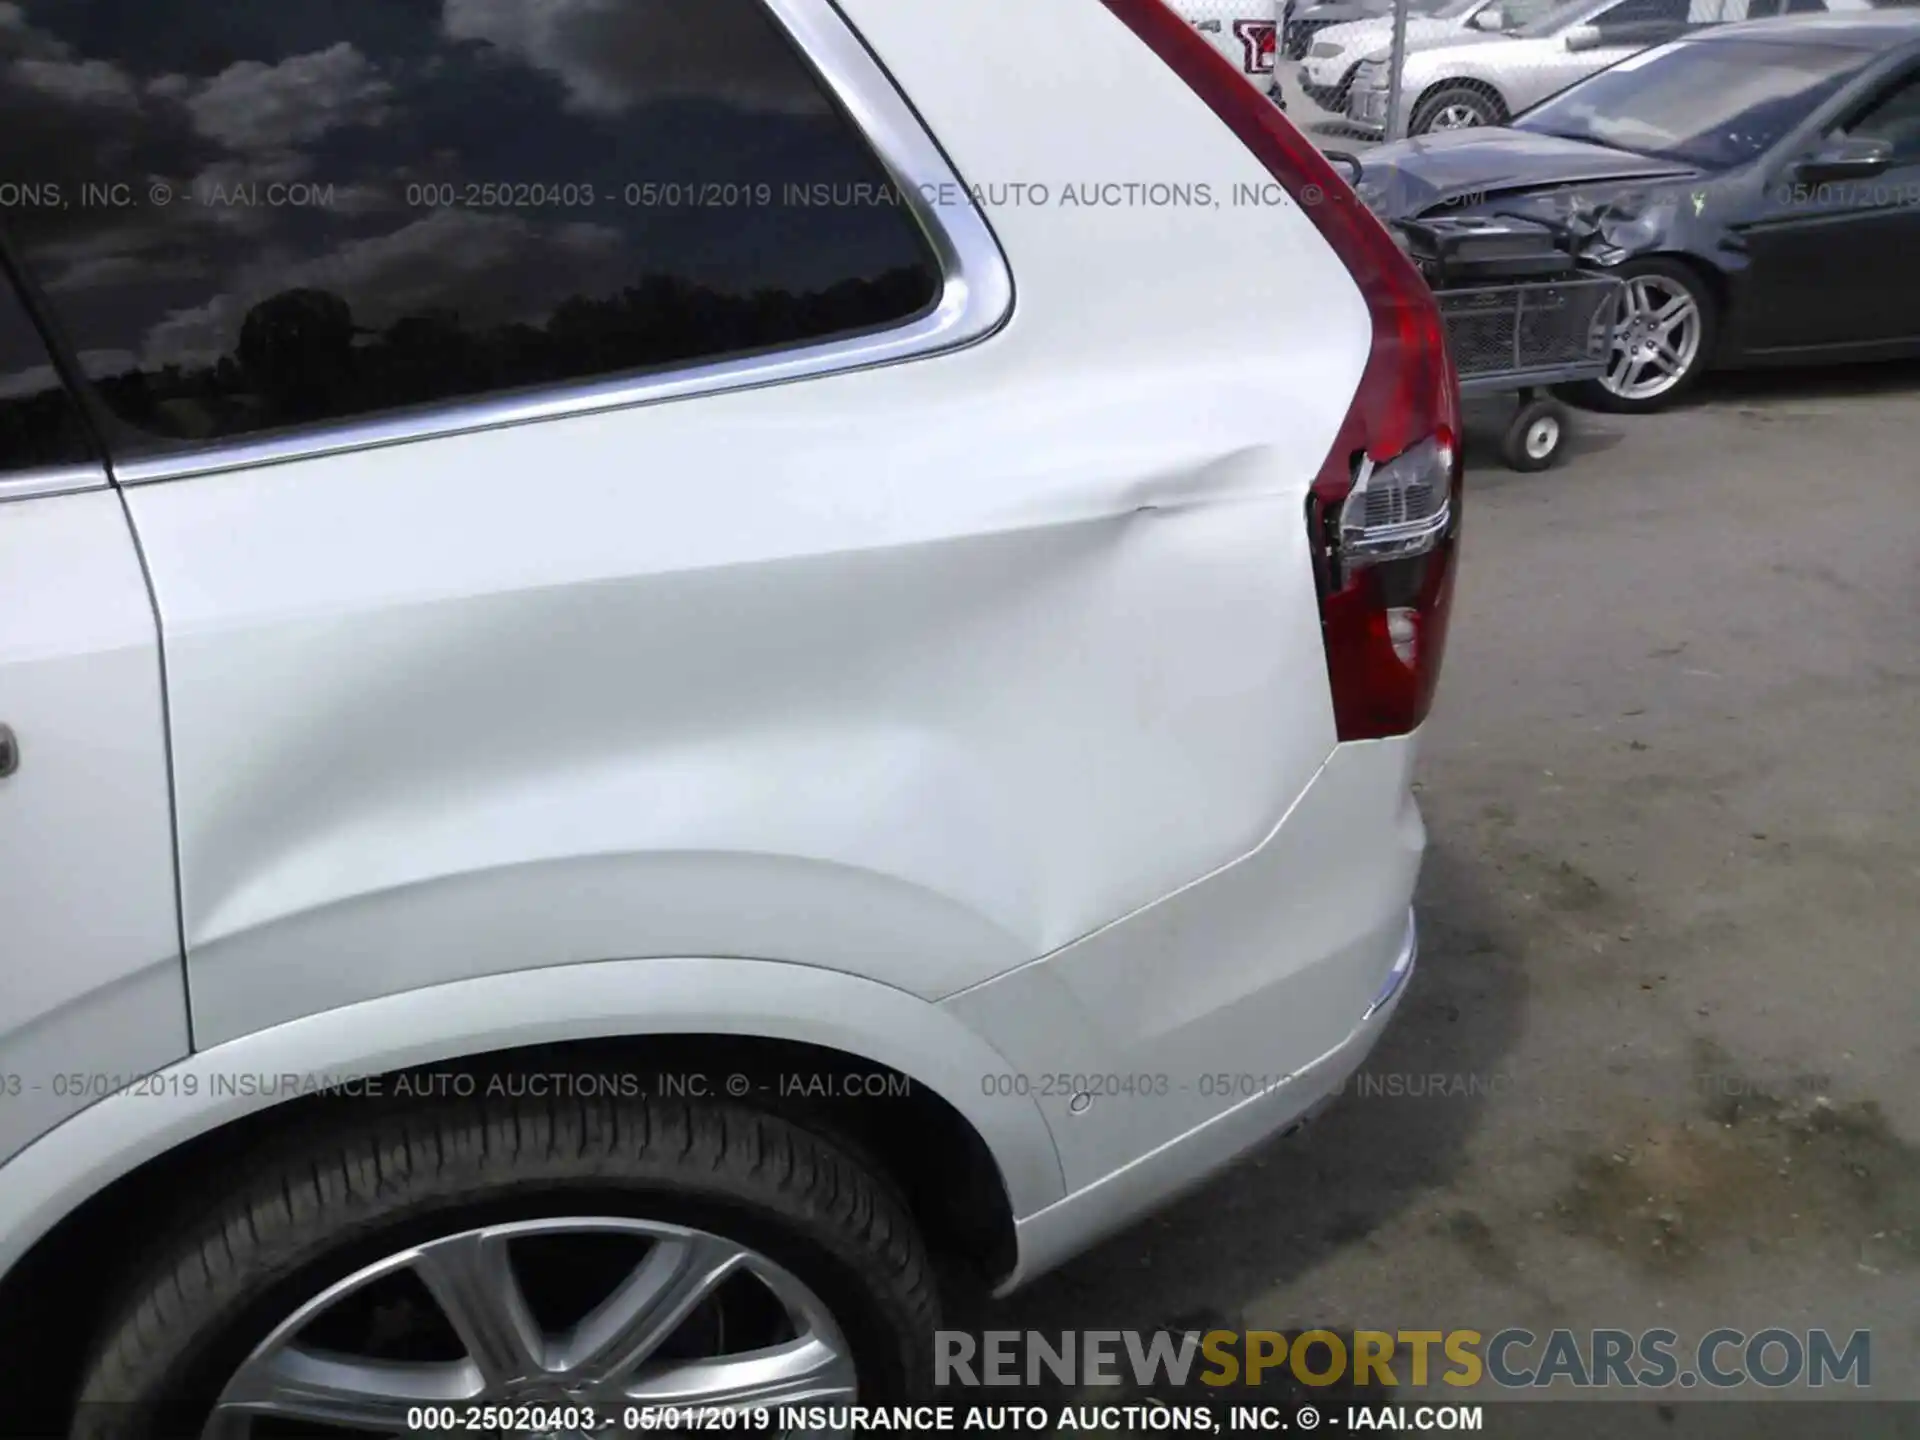 6 Photograph of a damaged car YV4A22PLXK1431420 VOLVO XC90 2019